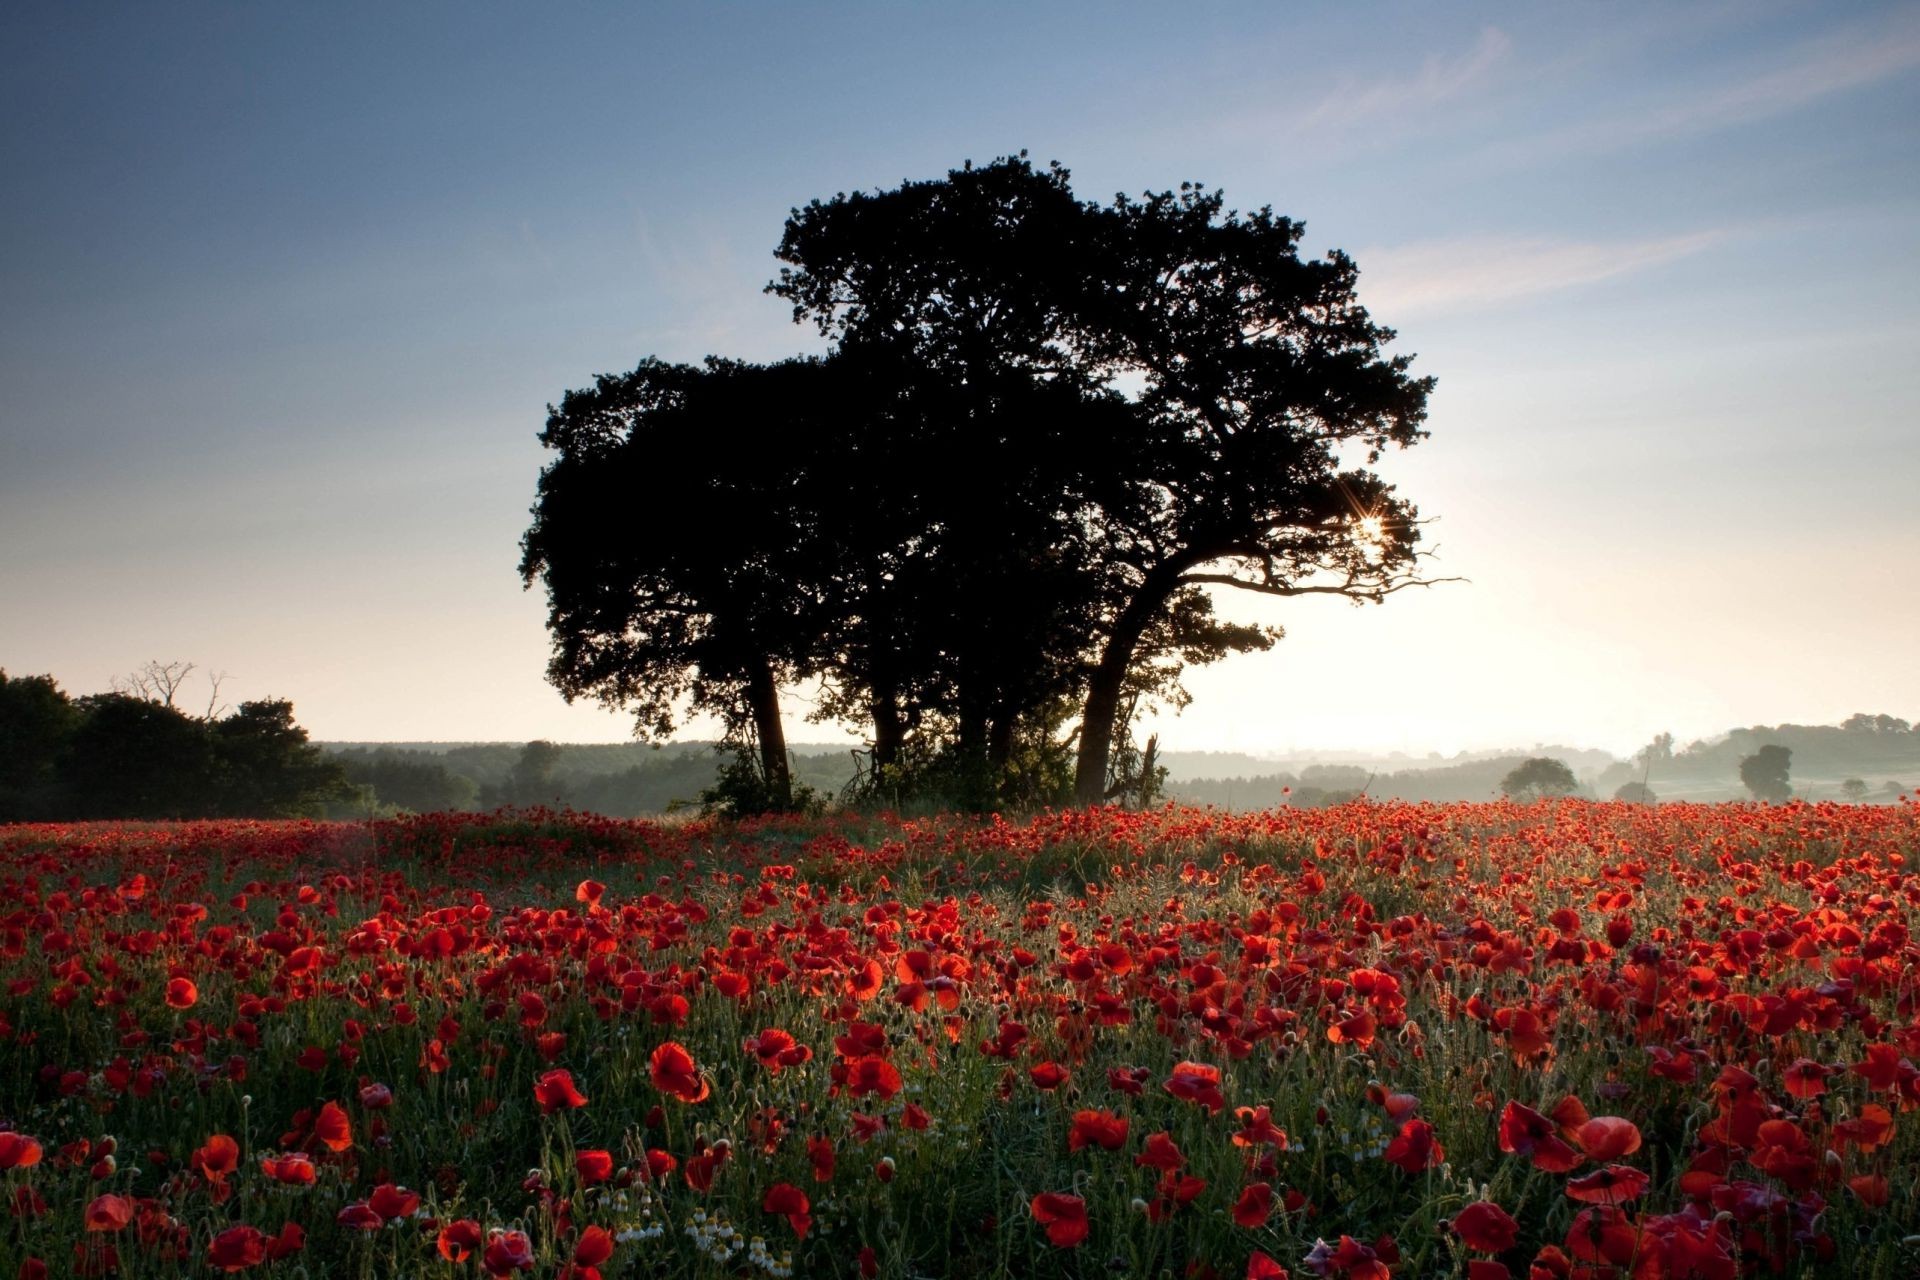 trees poppy flower landscape field tree outdoors cropland hayfield agriculture park tulip